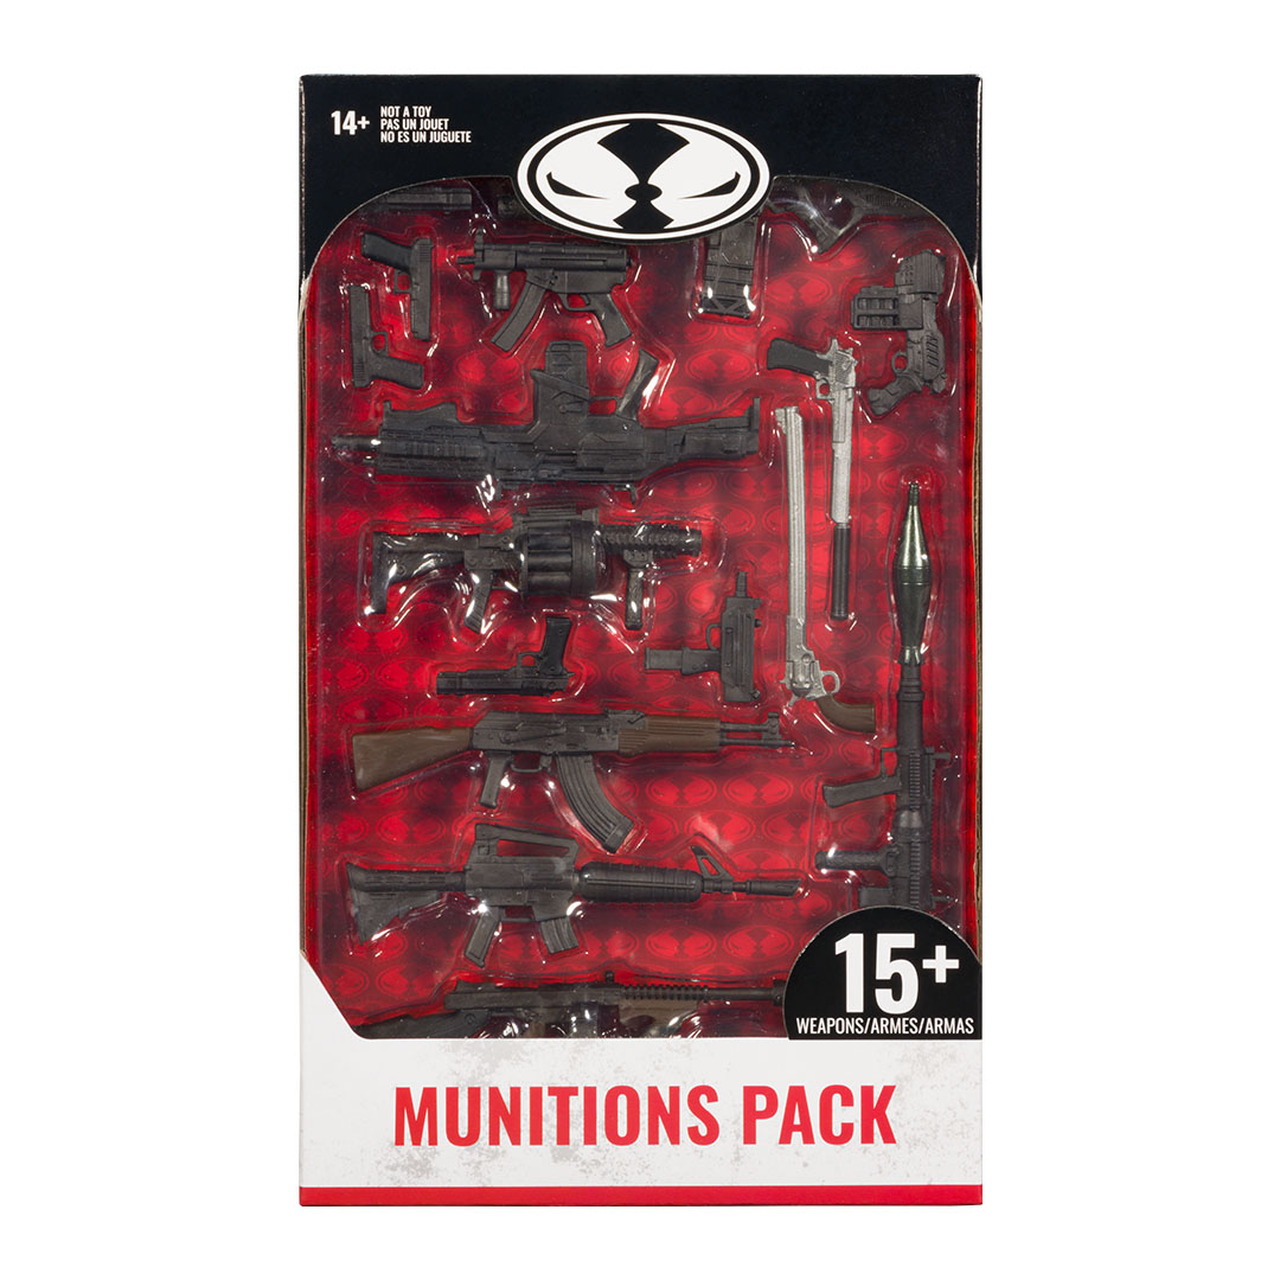 McFarlane Munitions Weapons Pack 7-Inch 15-Pack画像